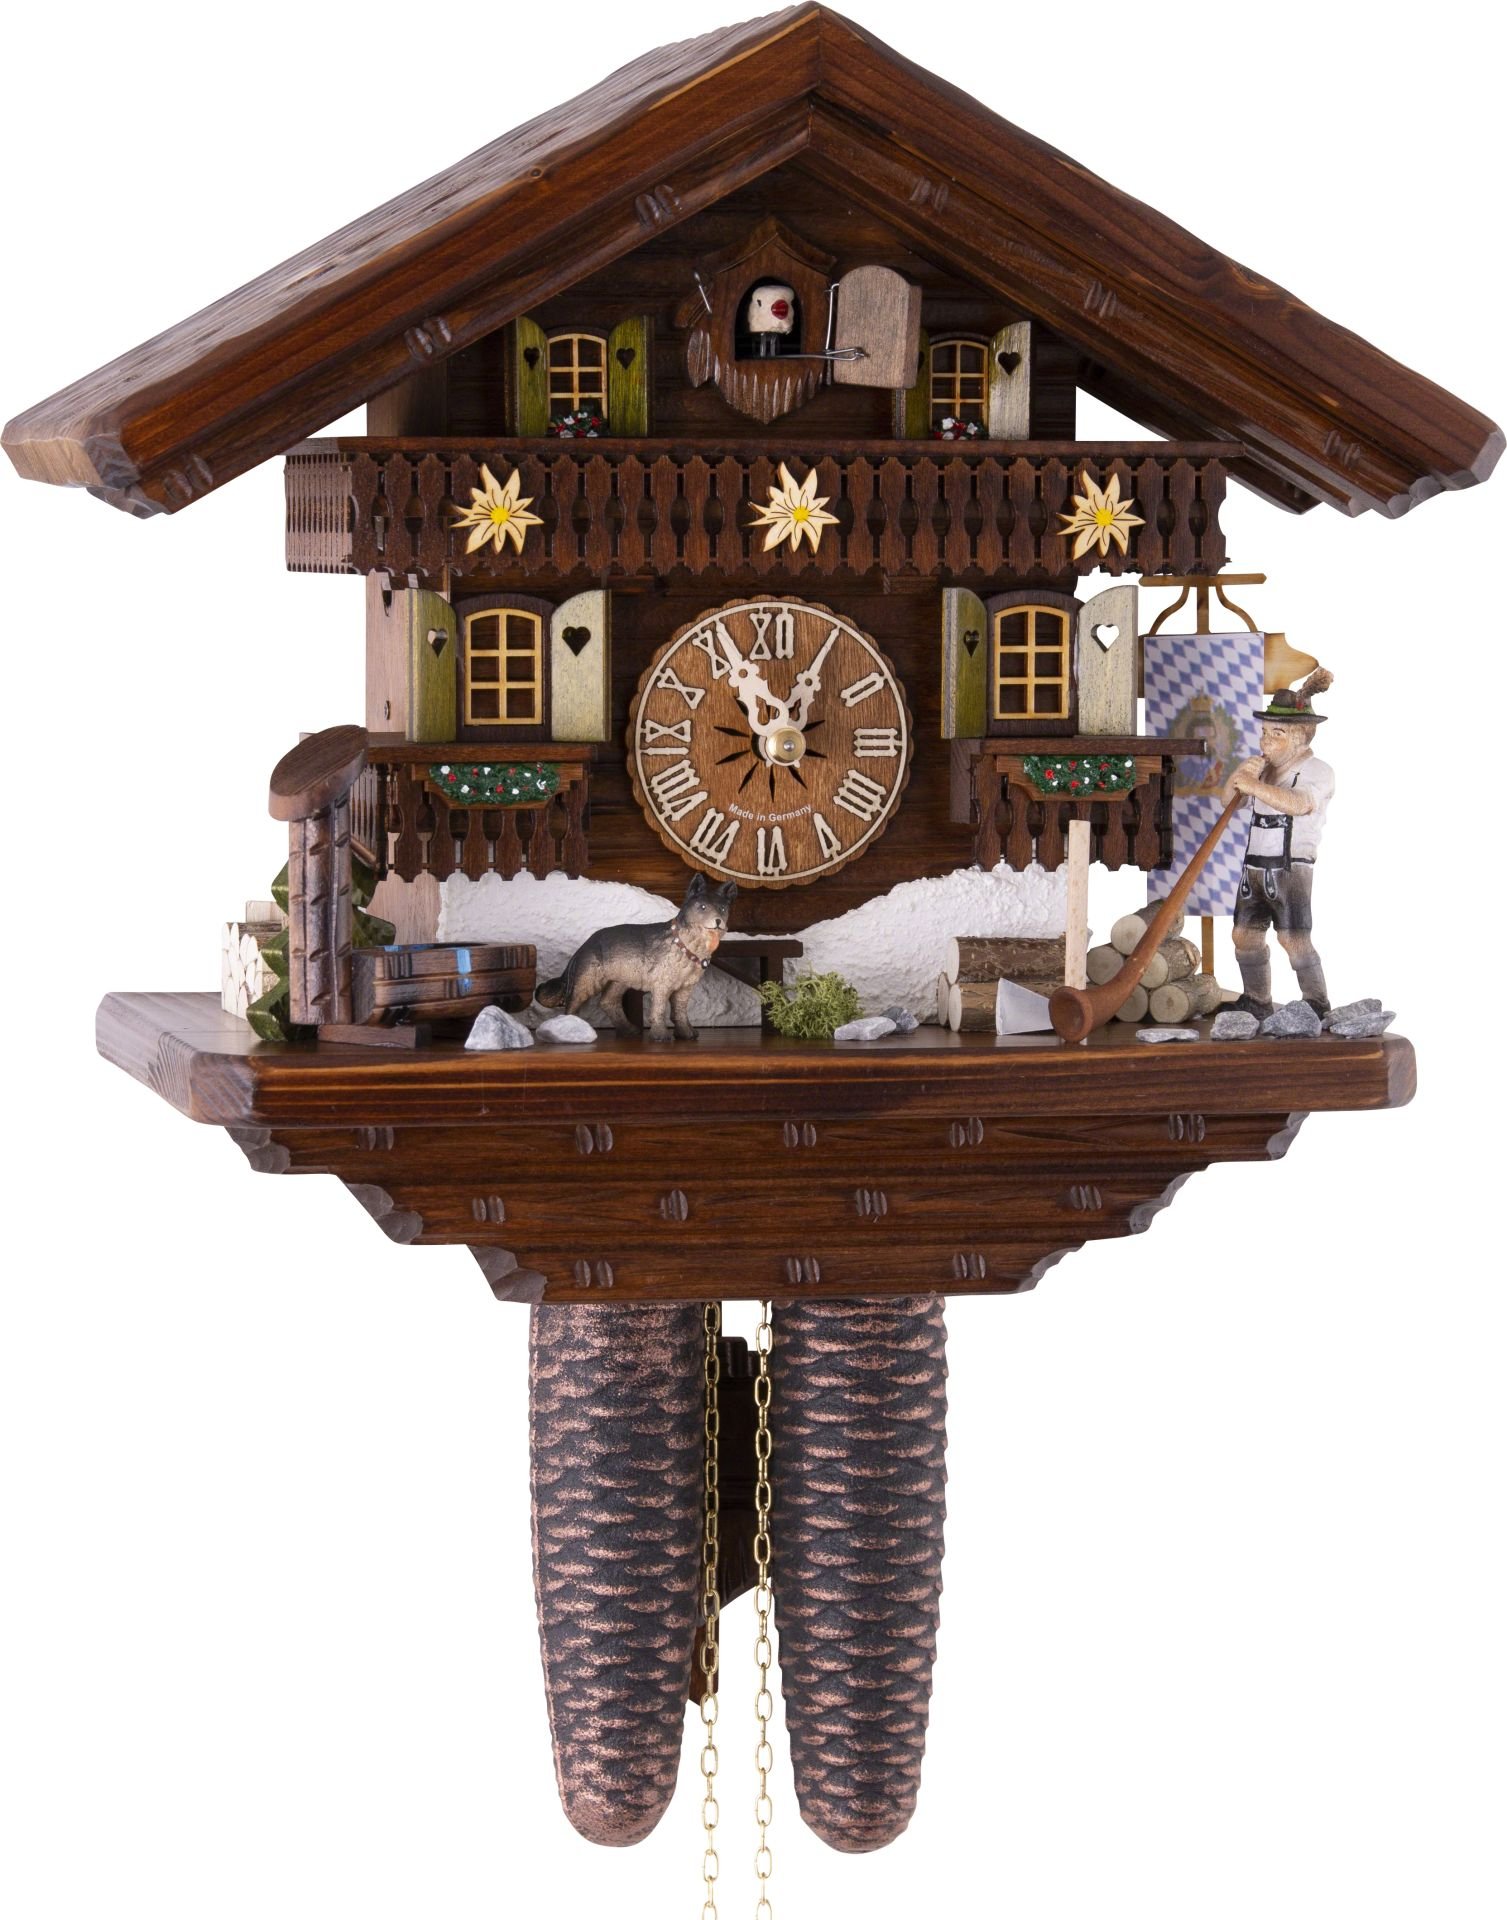 Cuckoo Clock Chalet Style 8 Day Movement 29cm by Hekas